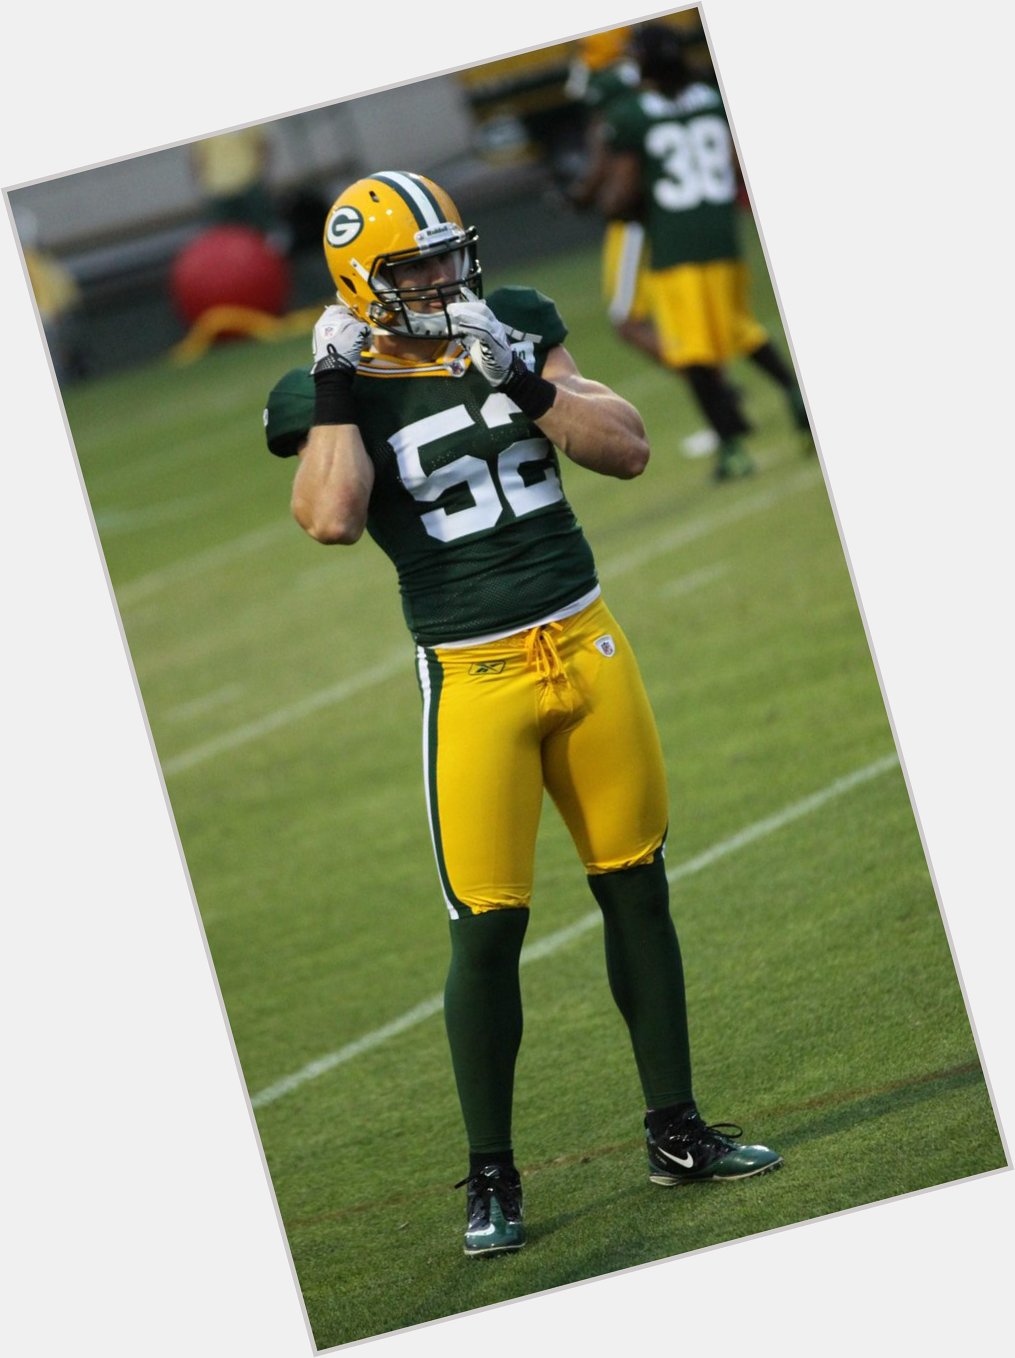 Happy 29th birthday to the one and only Clay Matthews III! Congratulations 